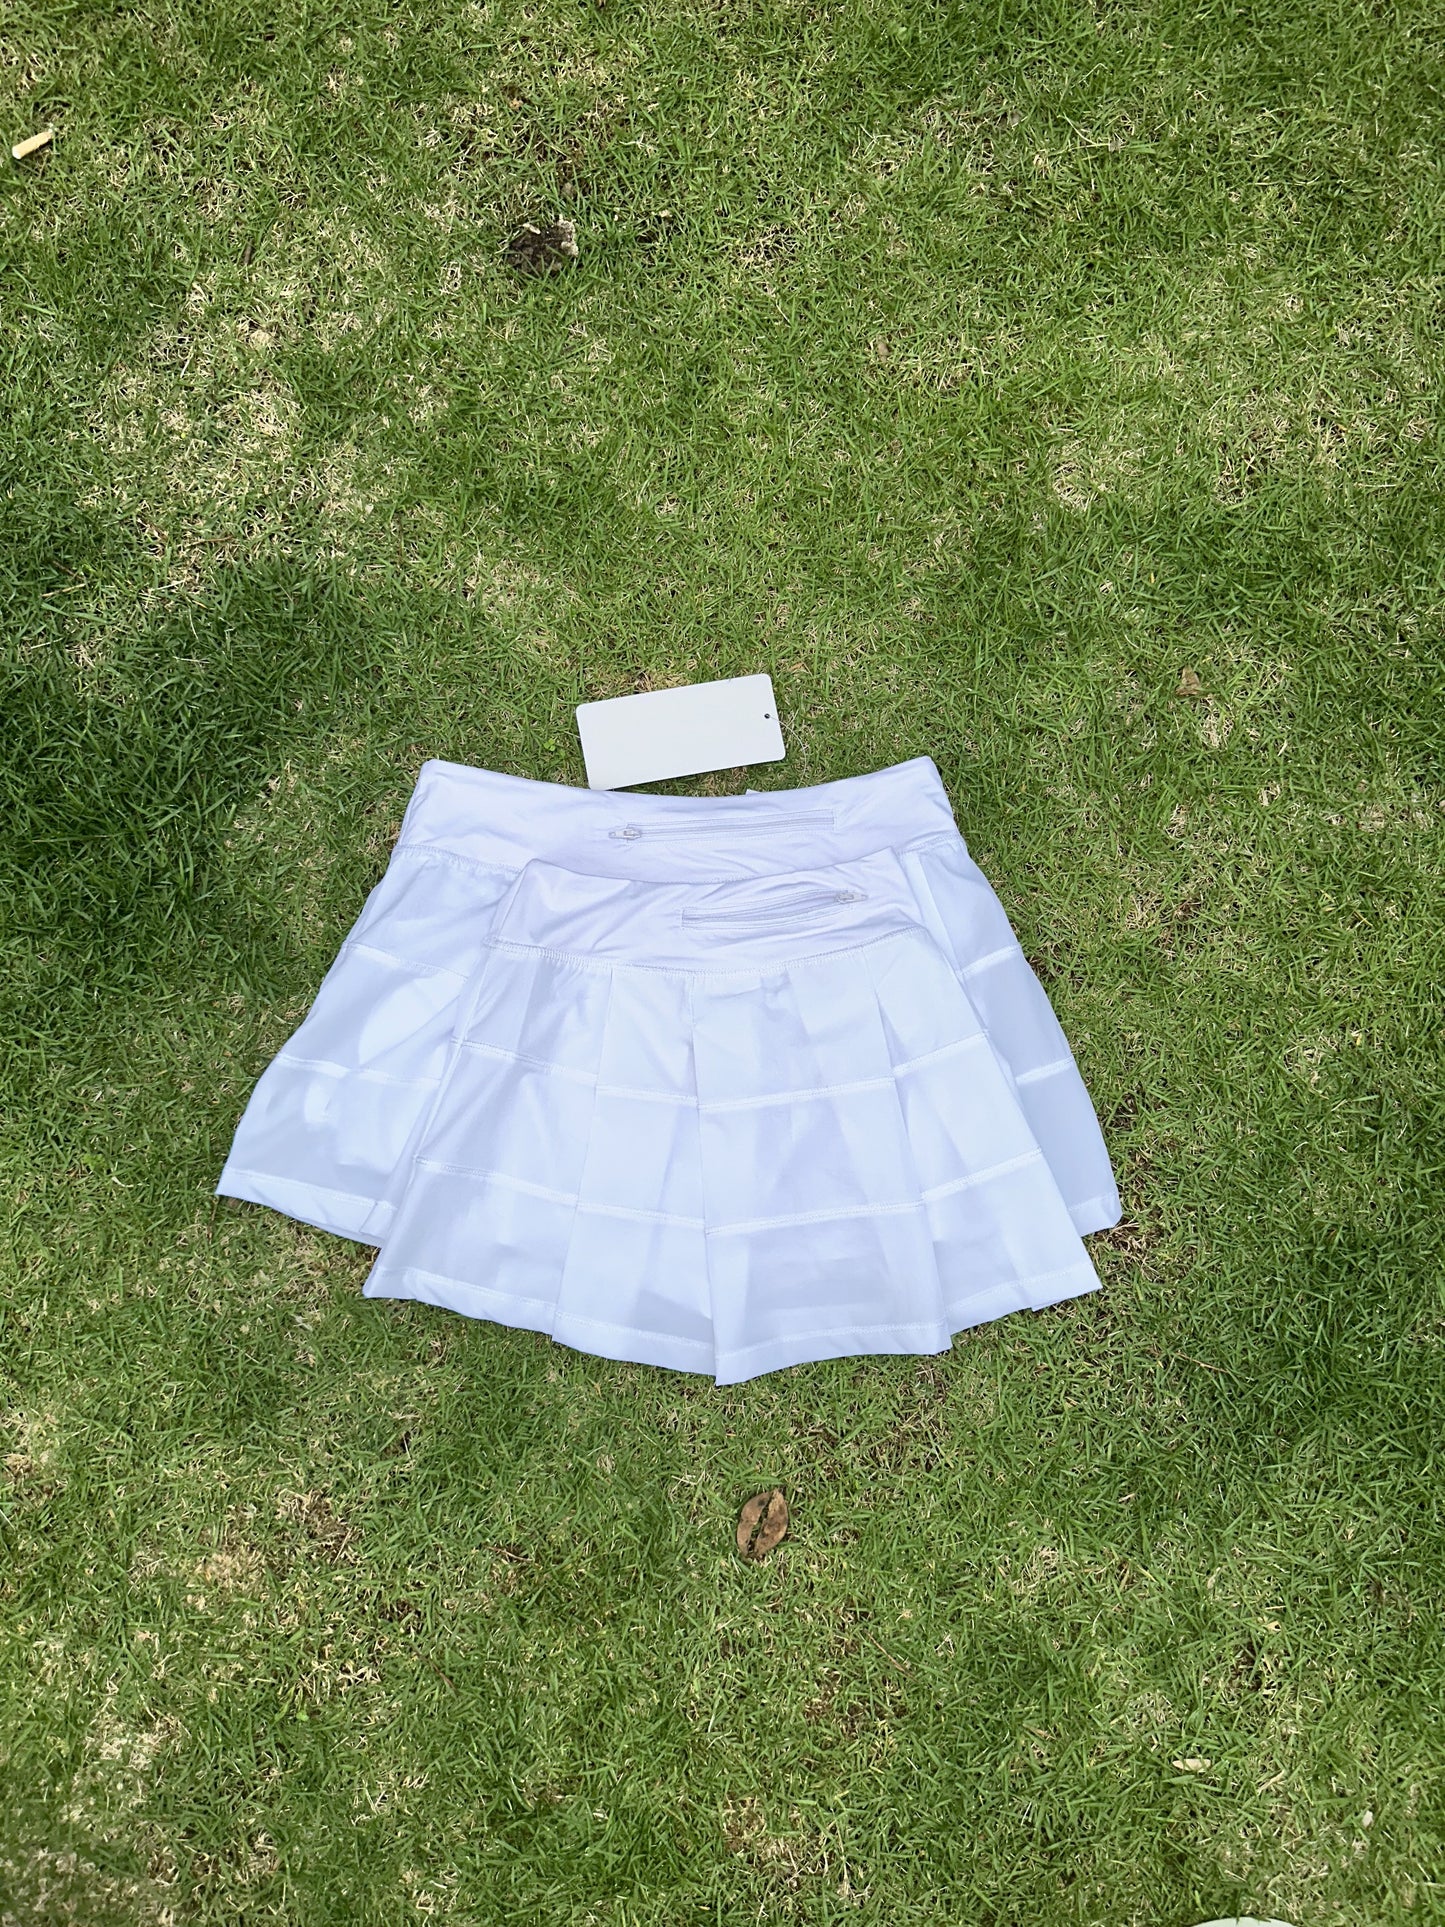 L2426# Kids And Adult Pleated Skirts